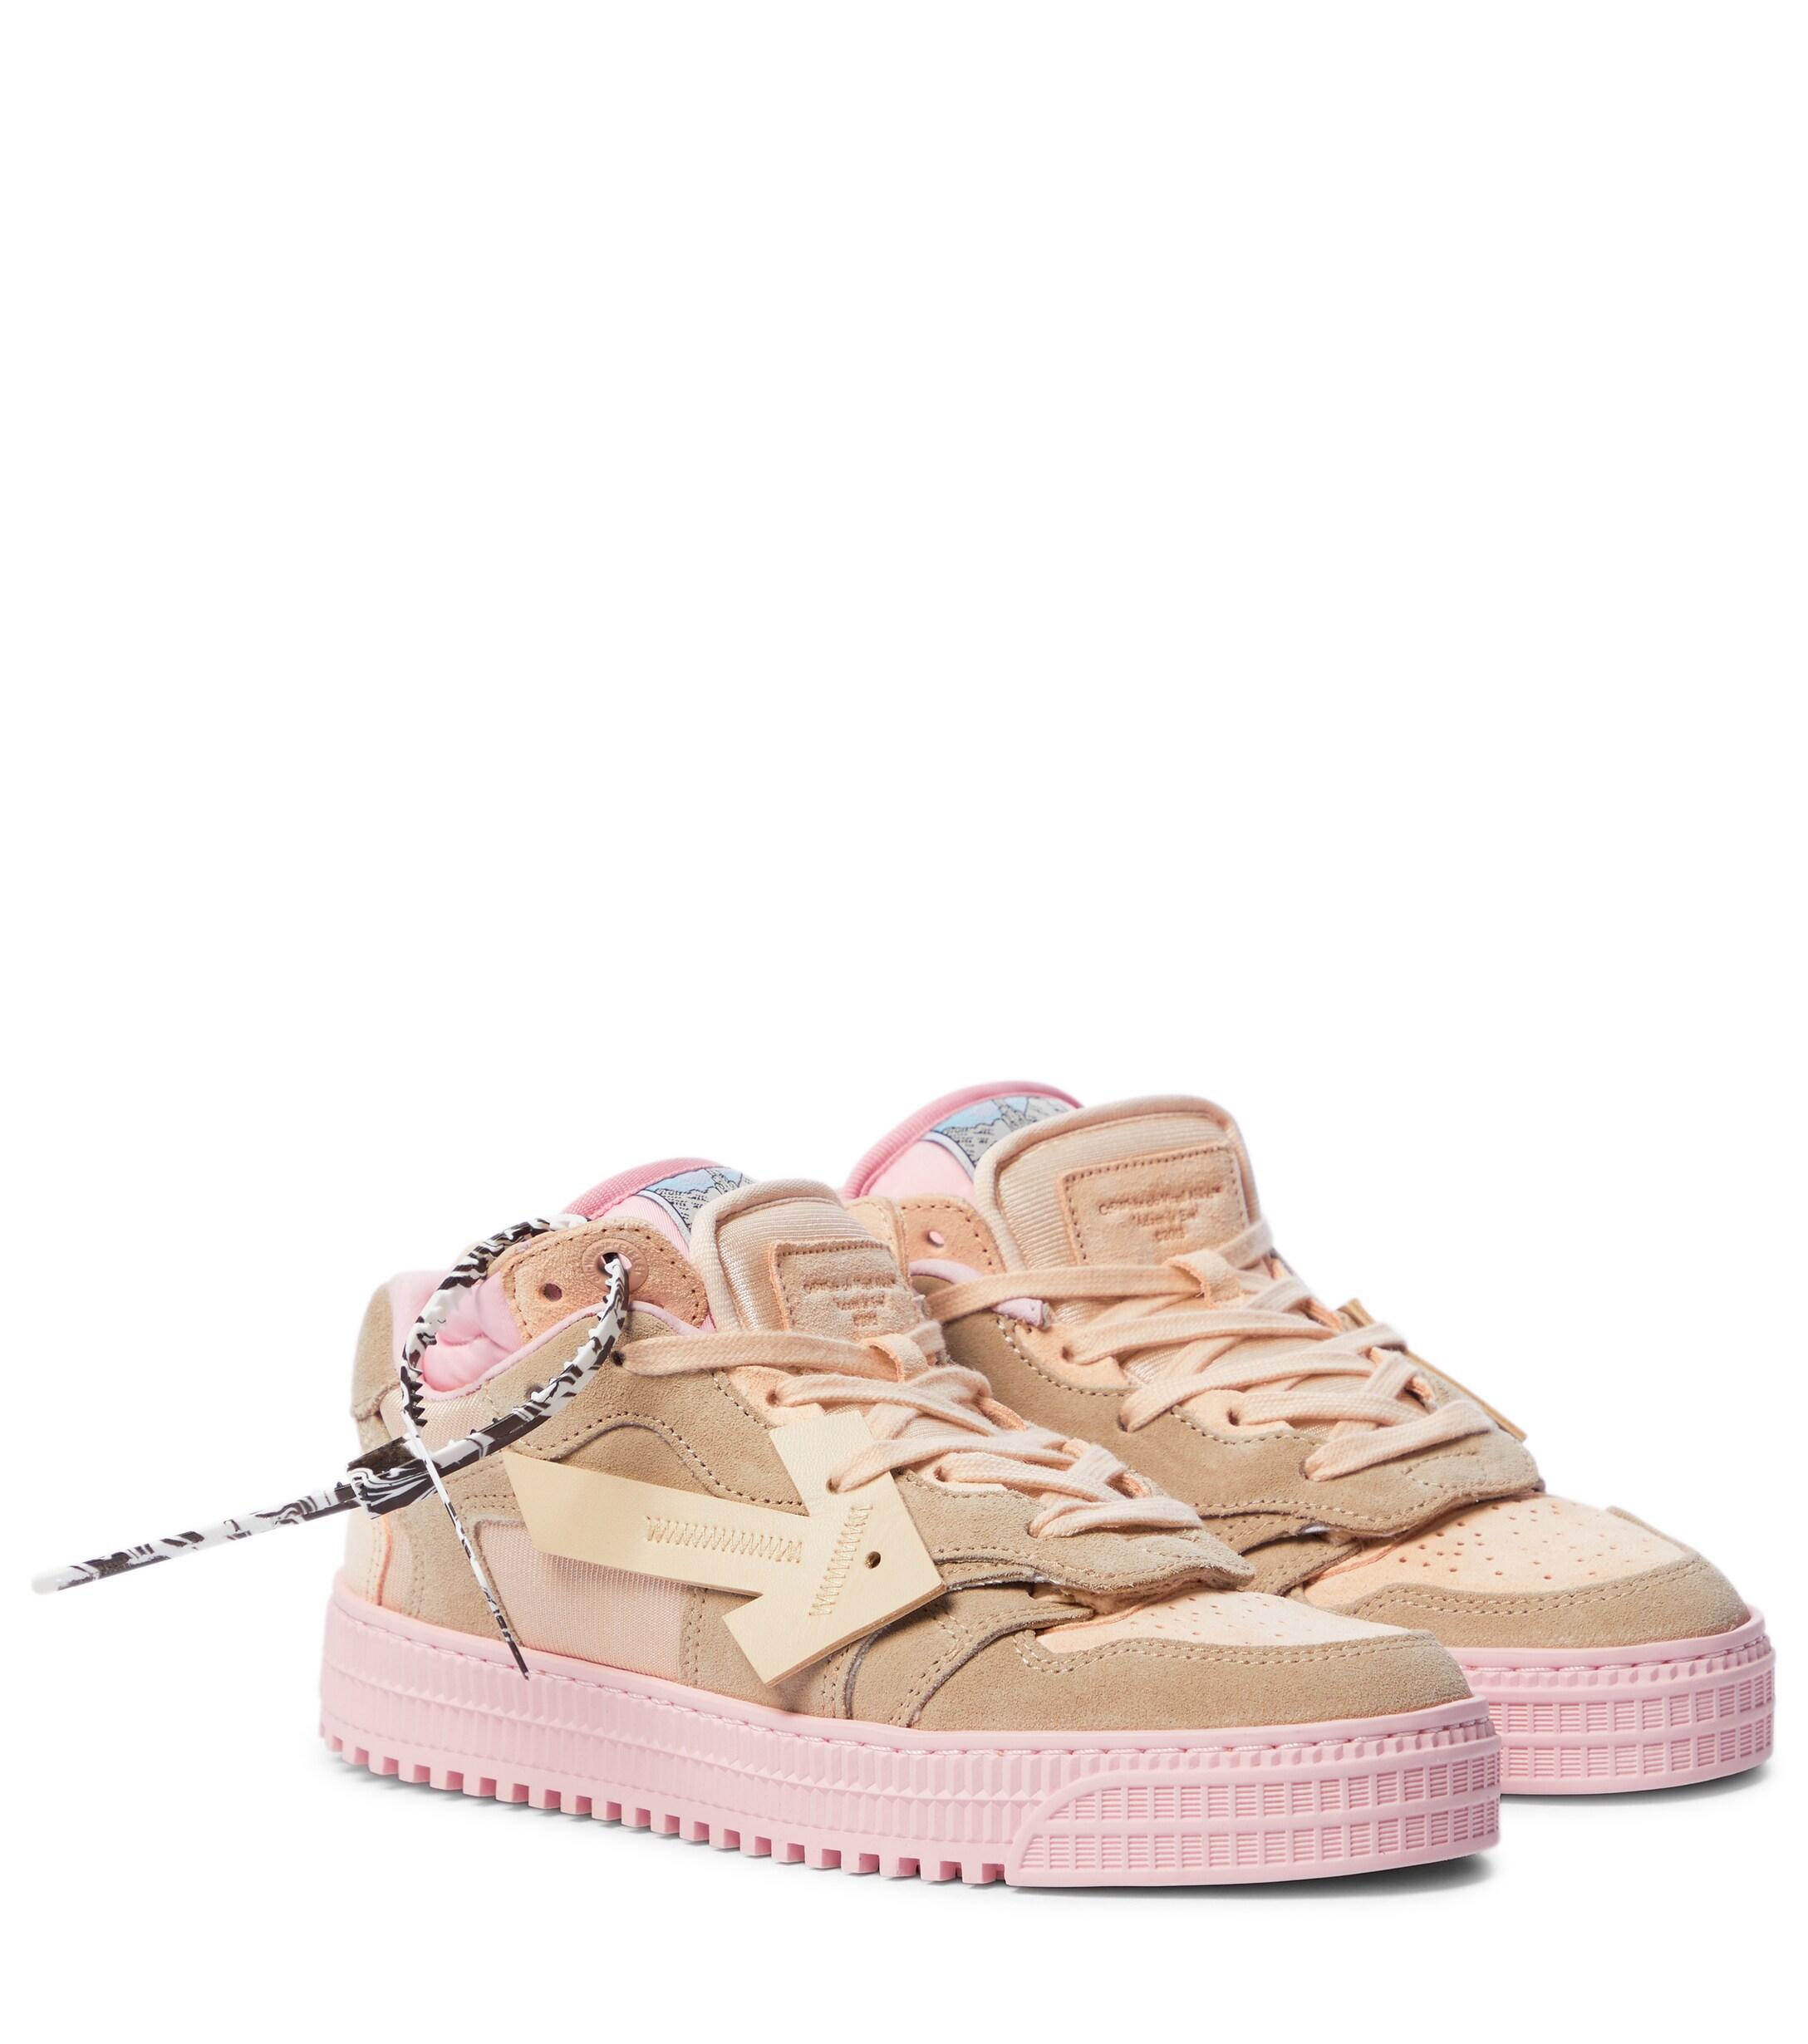 Off-White c/o Virgil Off-court 3.0 Sneakers in -